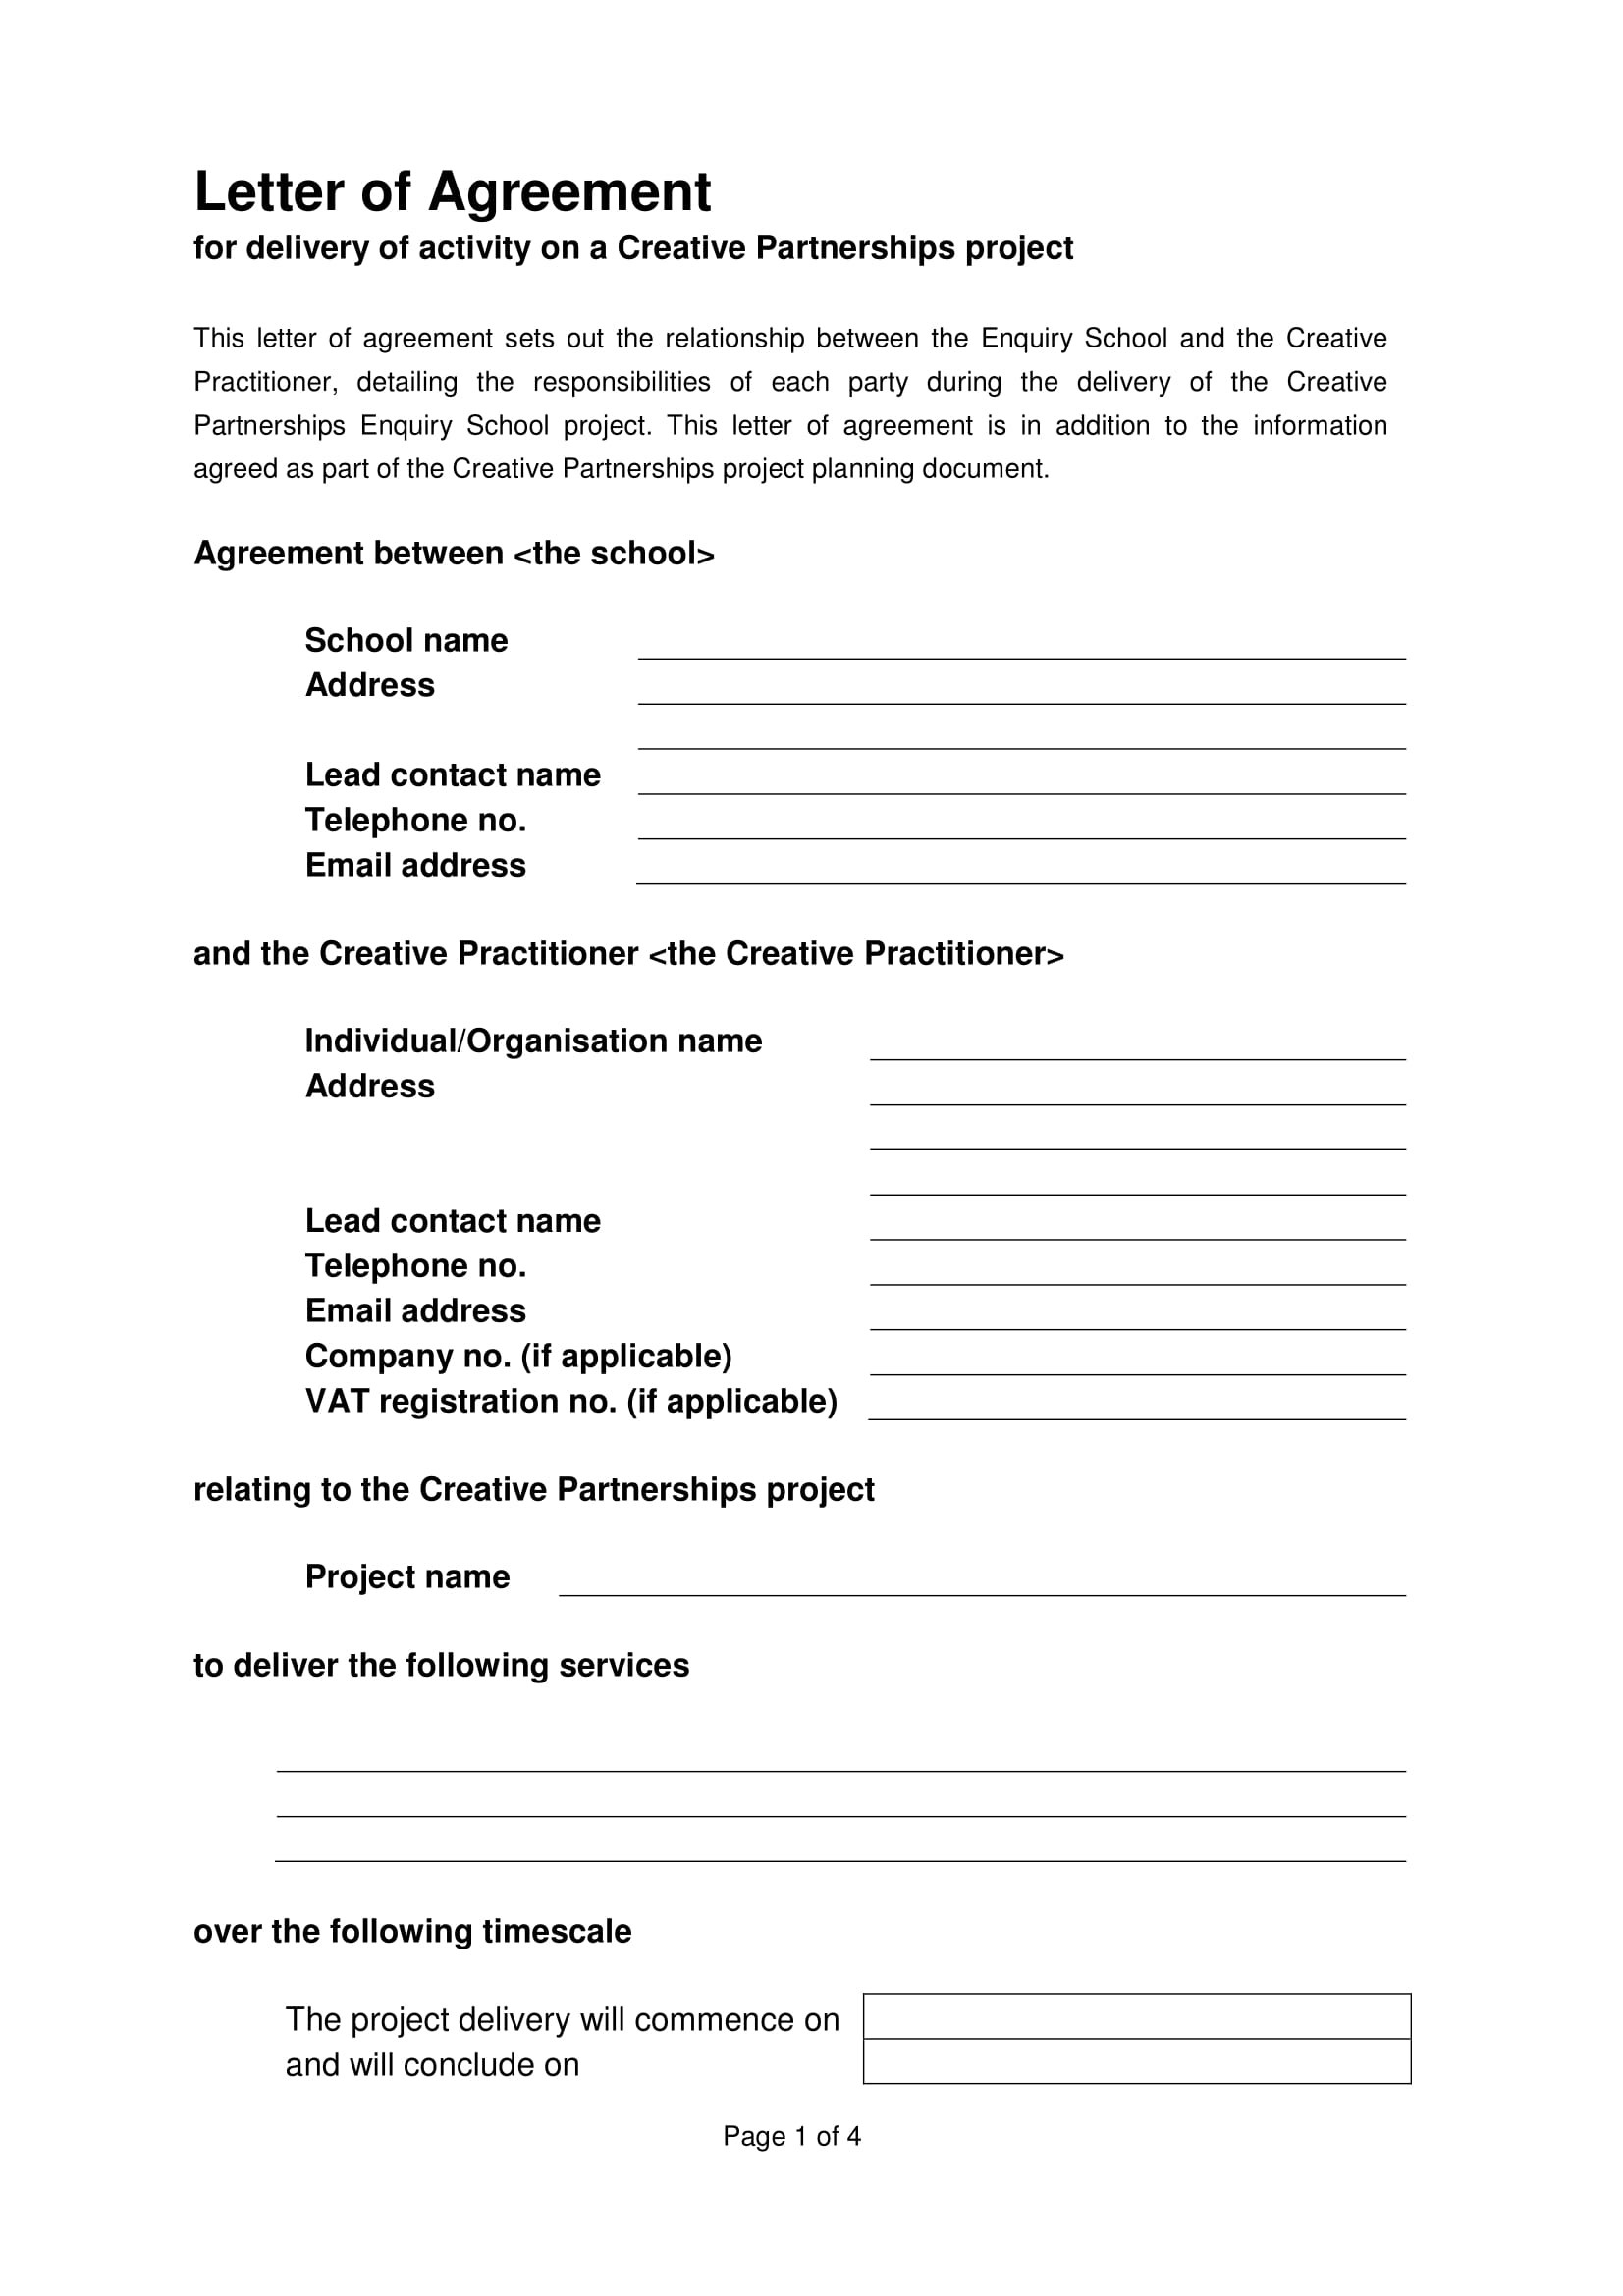 Letter Of Agreement Template 22 Letter Of Agreement Examples Pdf Doc